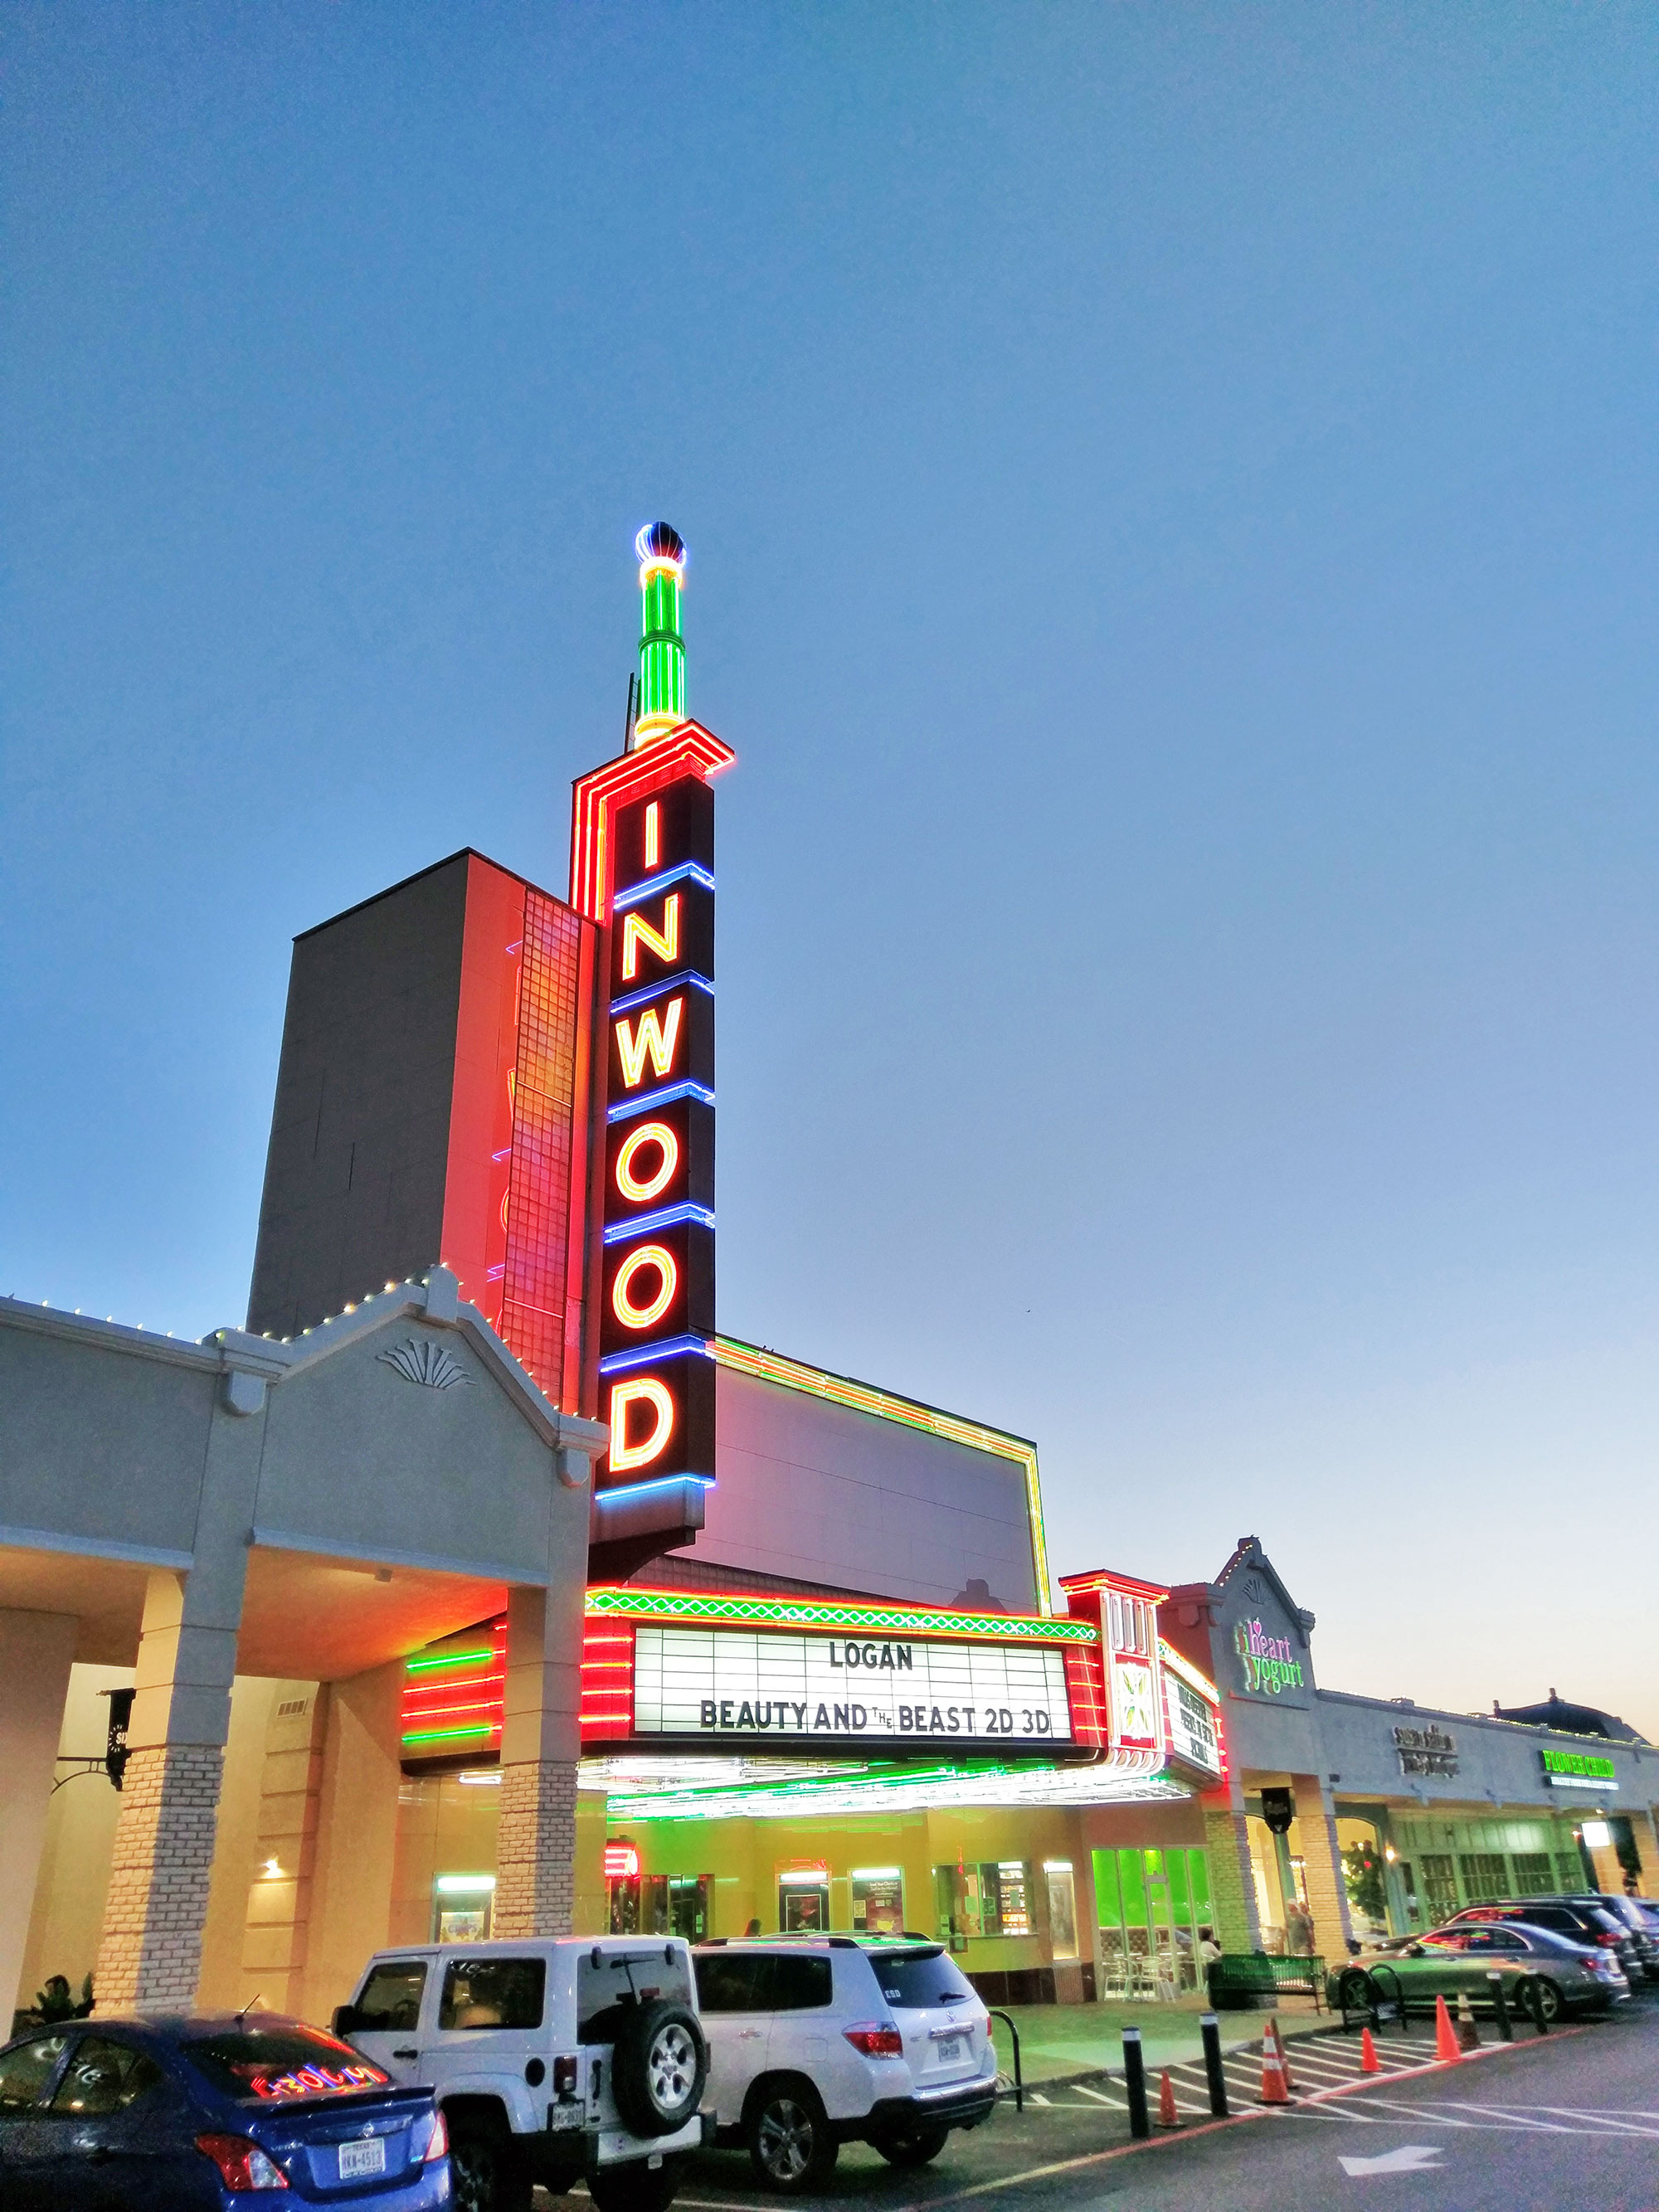 The Inwood Theatre on a spring evening in Dallas, Texas.